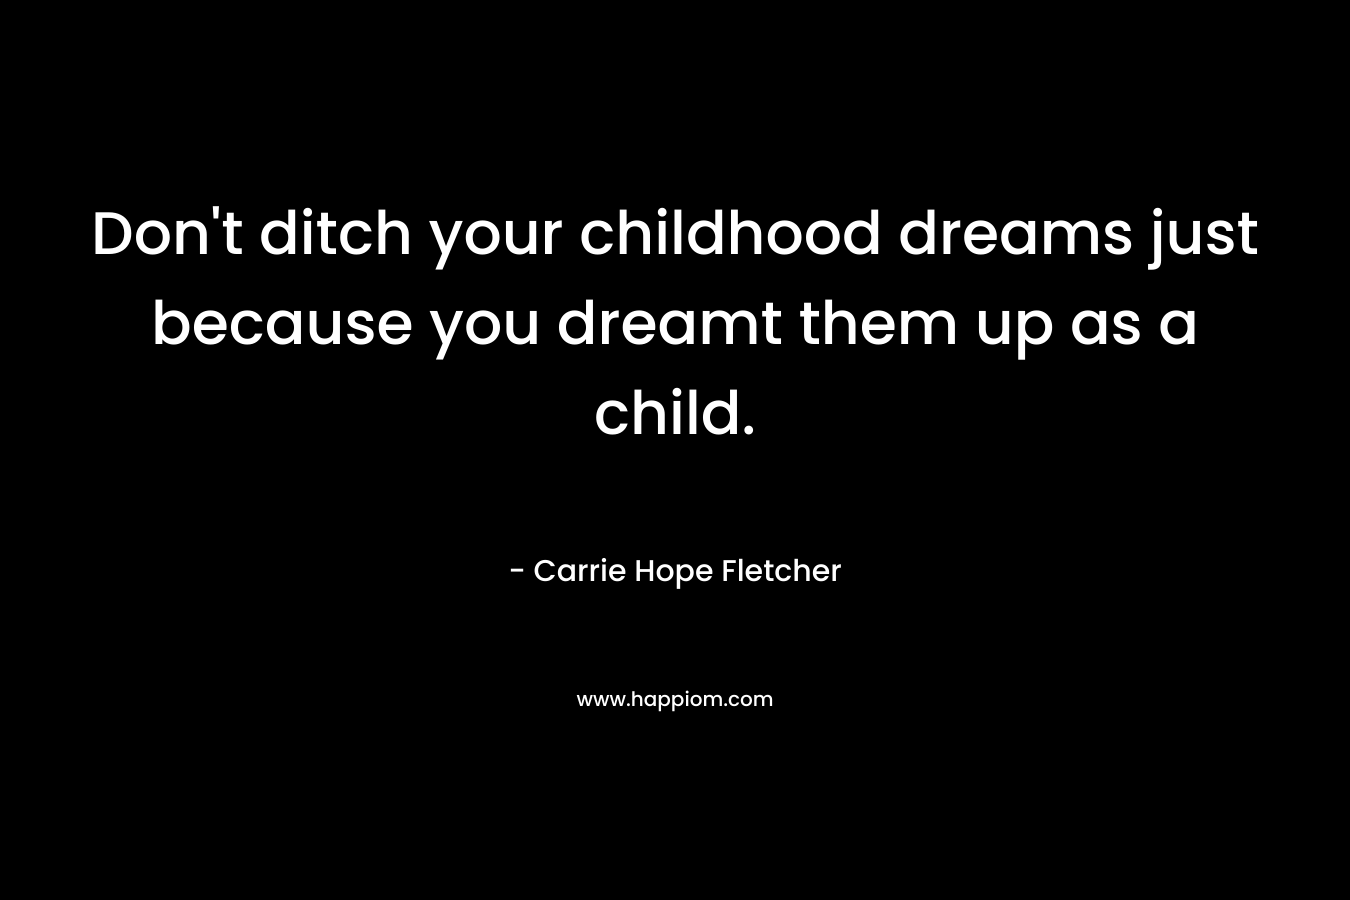 Don't ditch your childhood dreams just because you dreamt them up as a child.